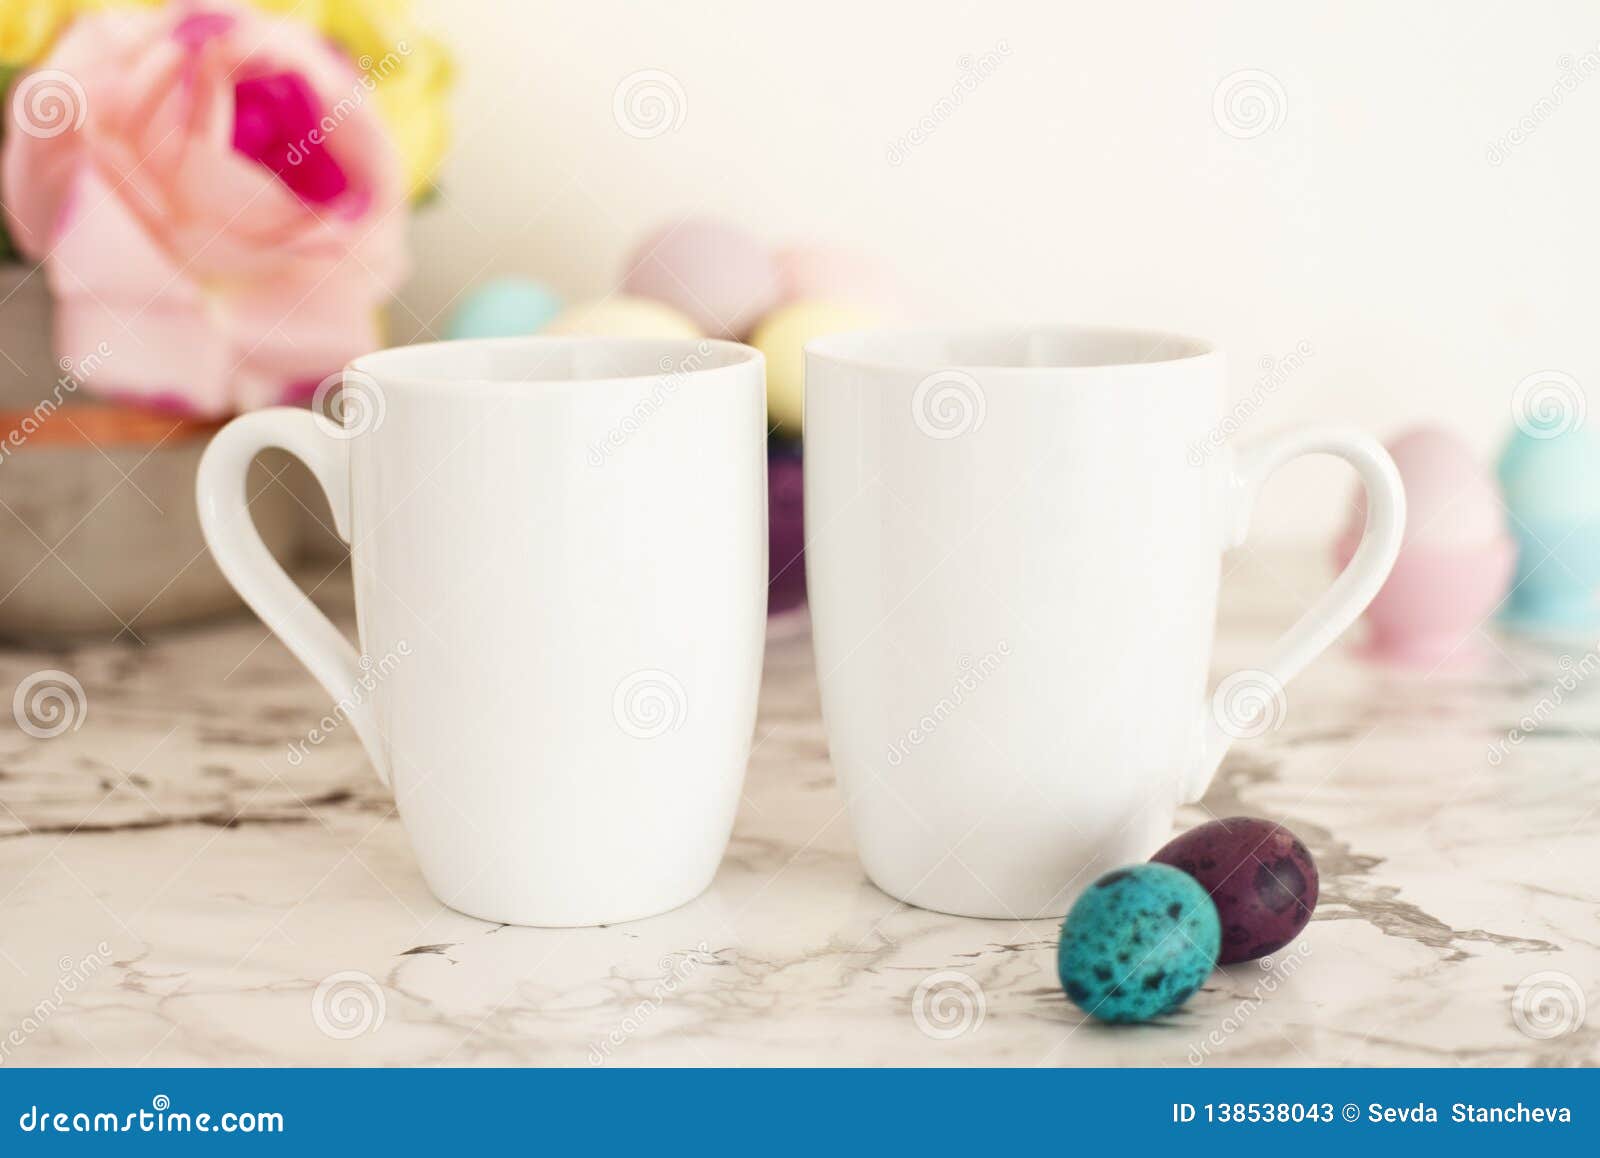 Download Two White Mugs Mockup Easter Theme Easter Eggs Colorful Eggs In Matte Colors Light Marble Background Stock Image Image Of Design Customizable 138538043